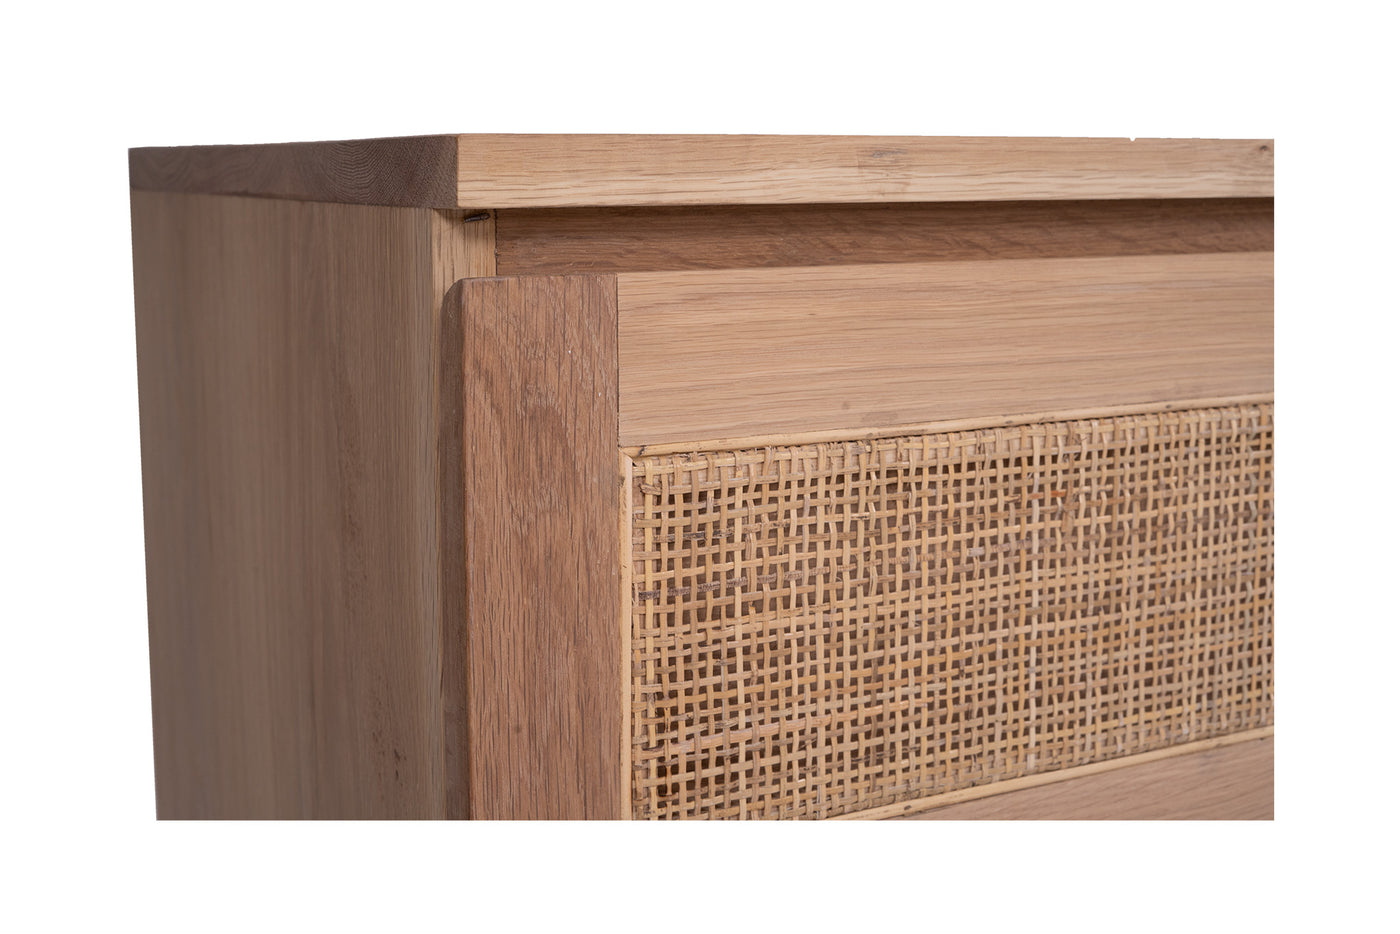 Tom Chest Of Drawers - 4 Drawers